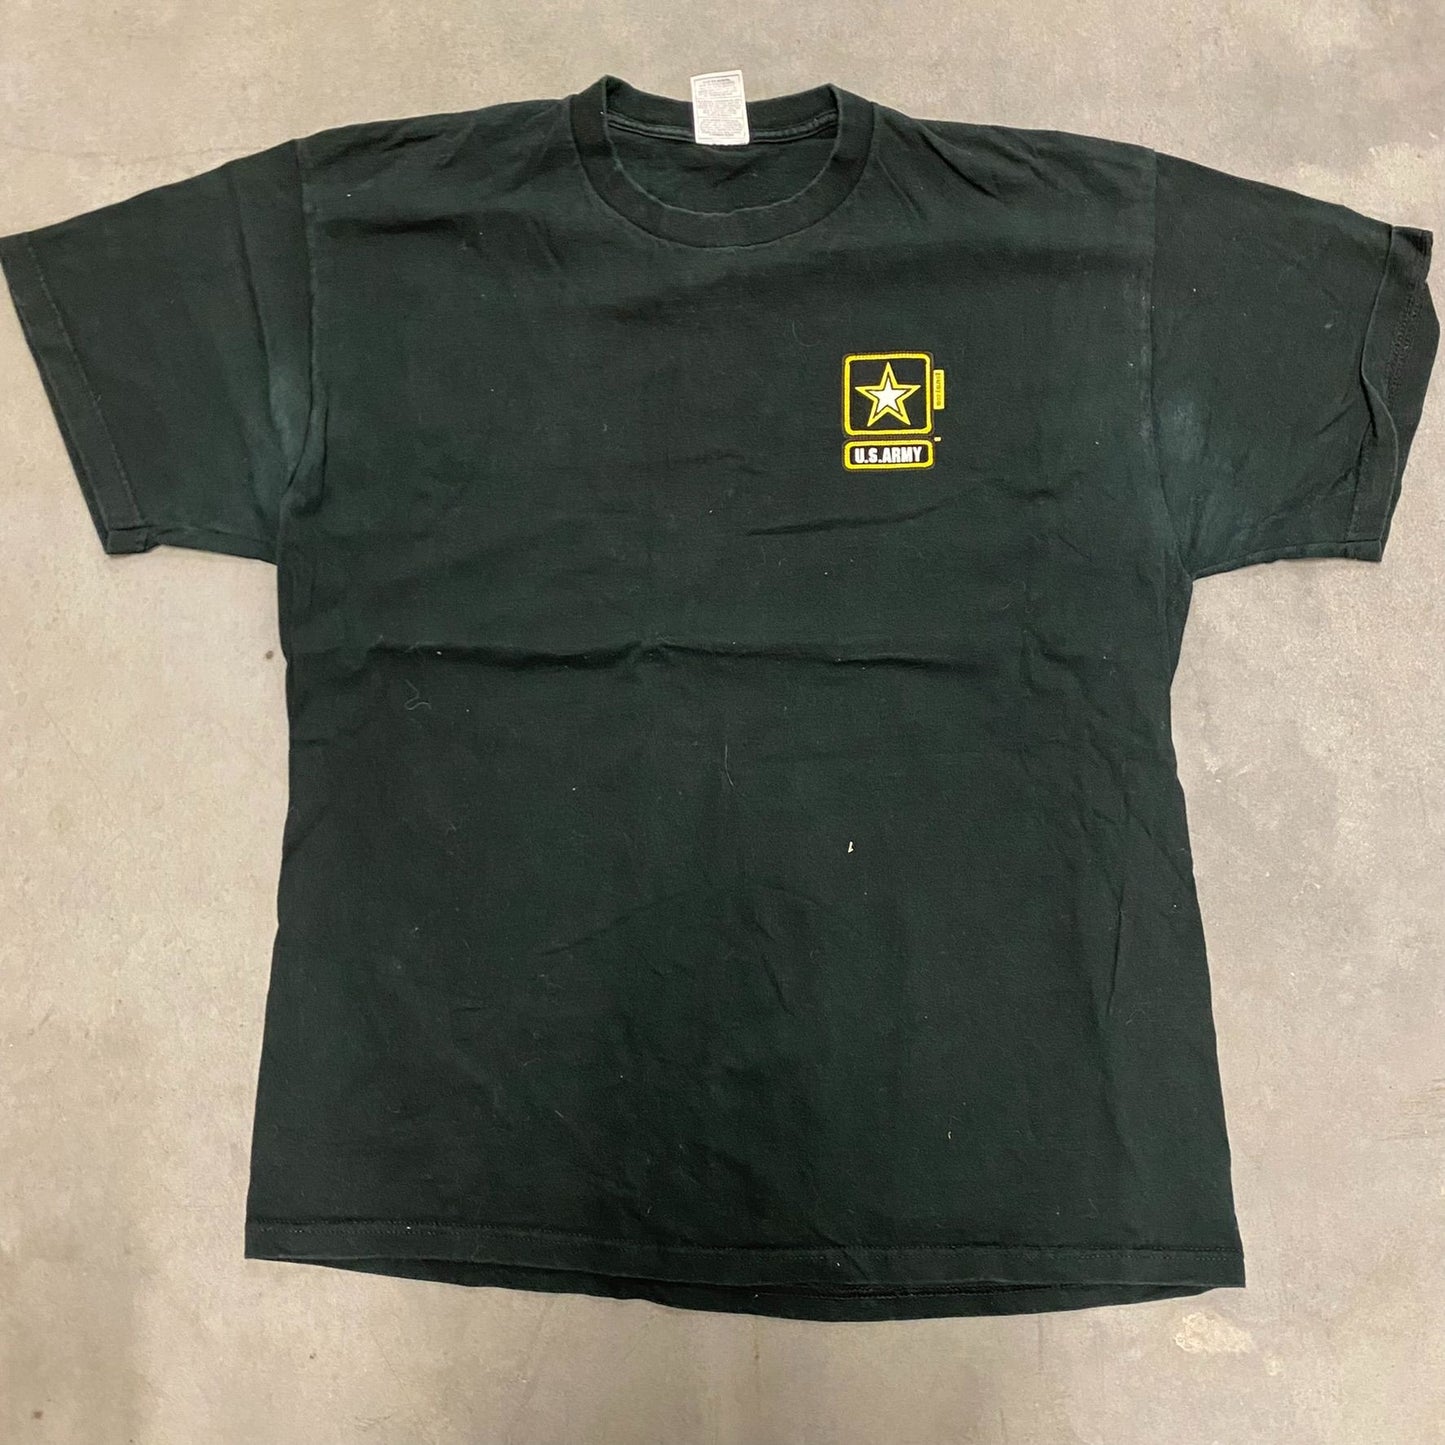 US Army of One T-Shirt